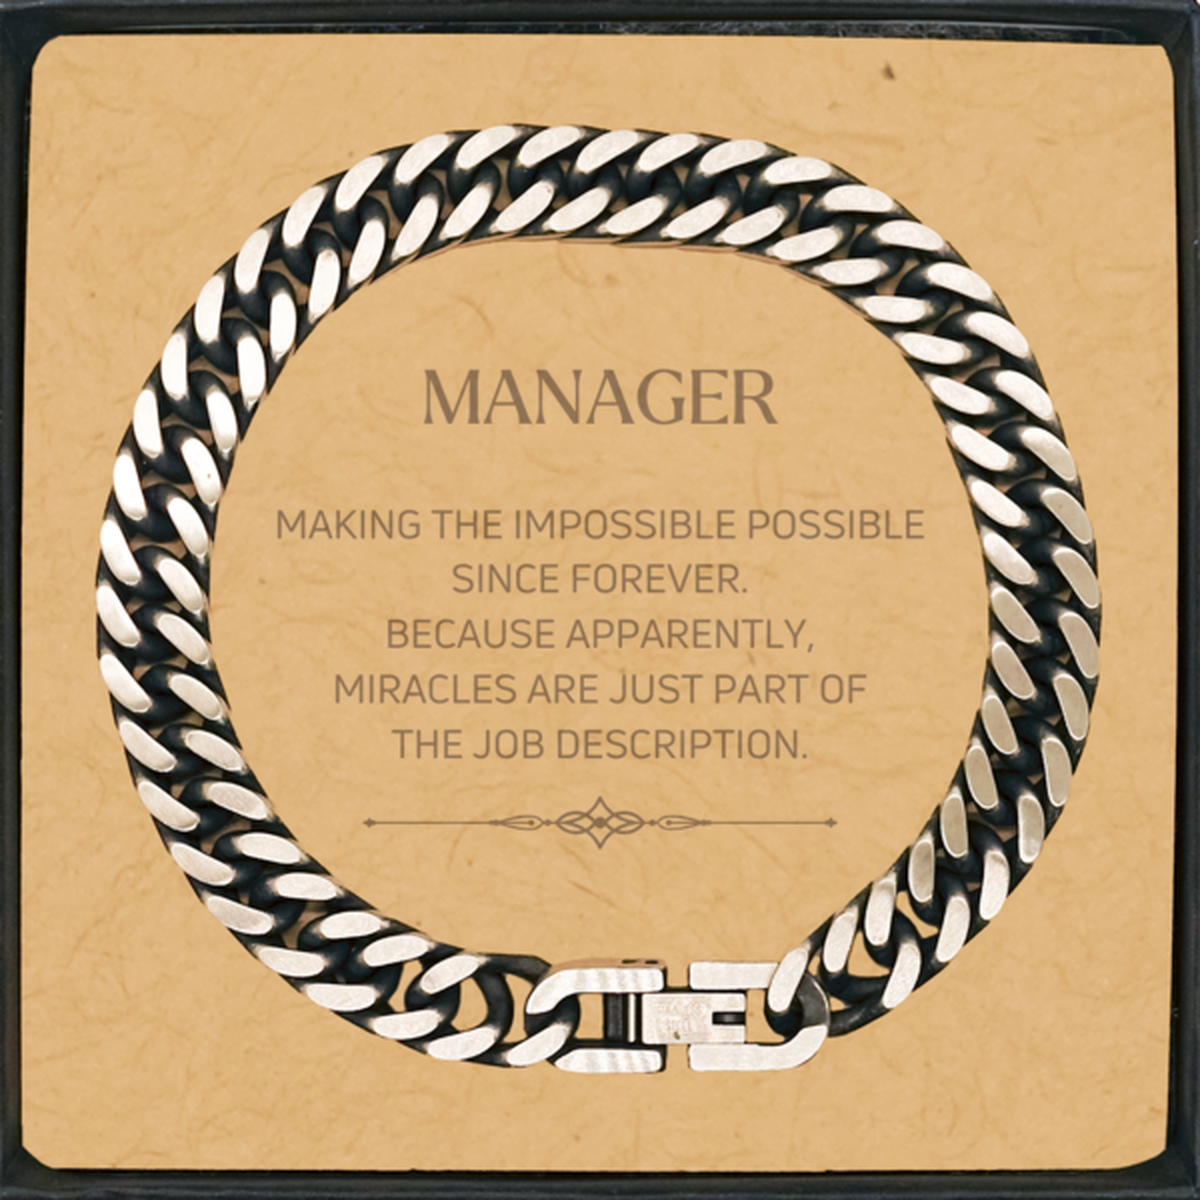 Funny Manager Gifts, Miracles are just part of the job description, Inspirational Birthday Cuban Link Chain Bracelet For Manager, Men, Women, Coworkers, Friends, Boss